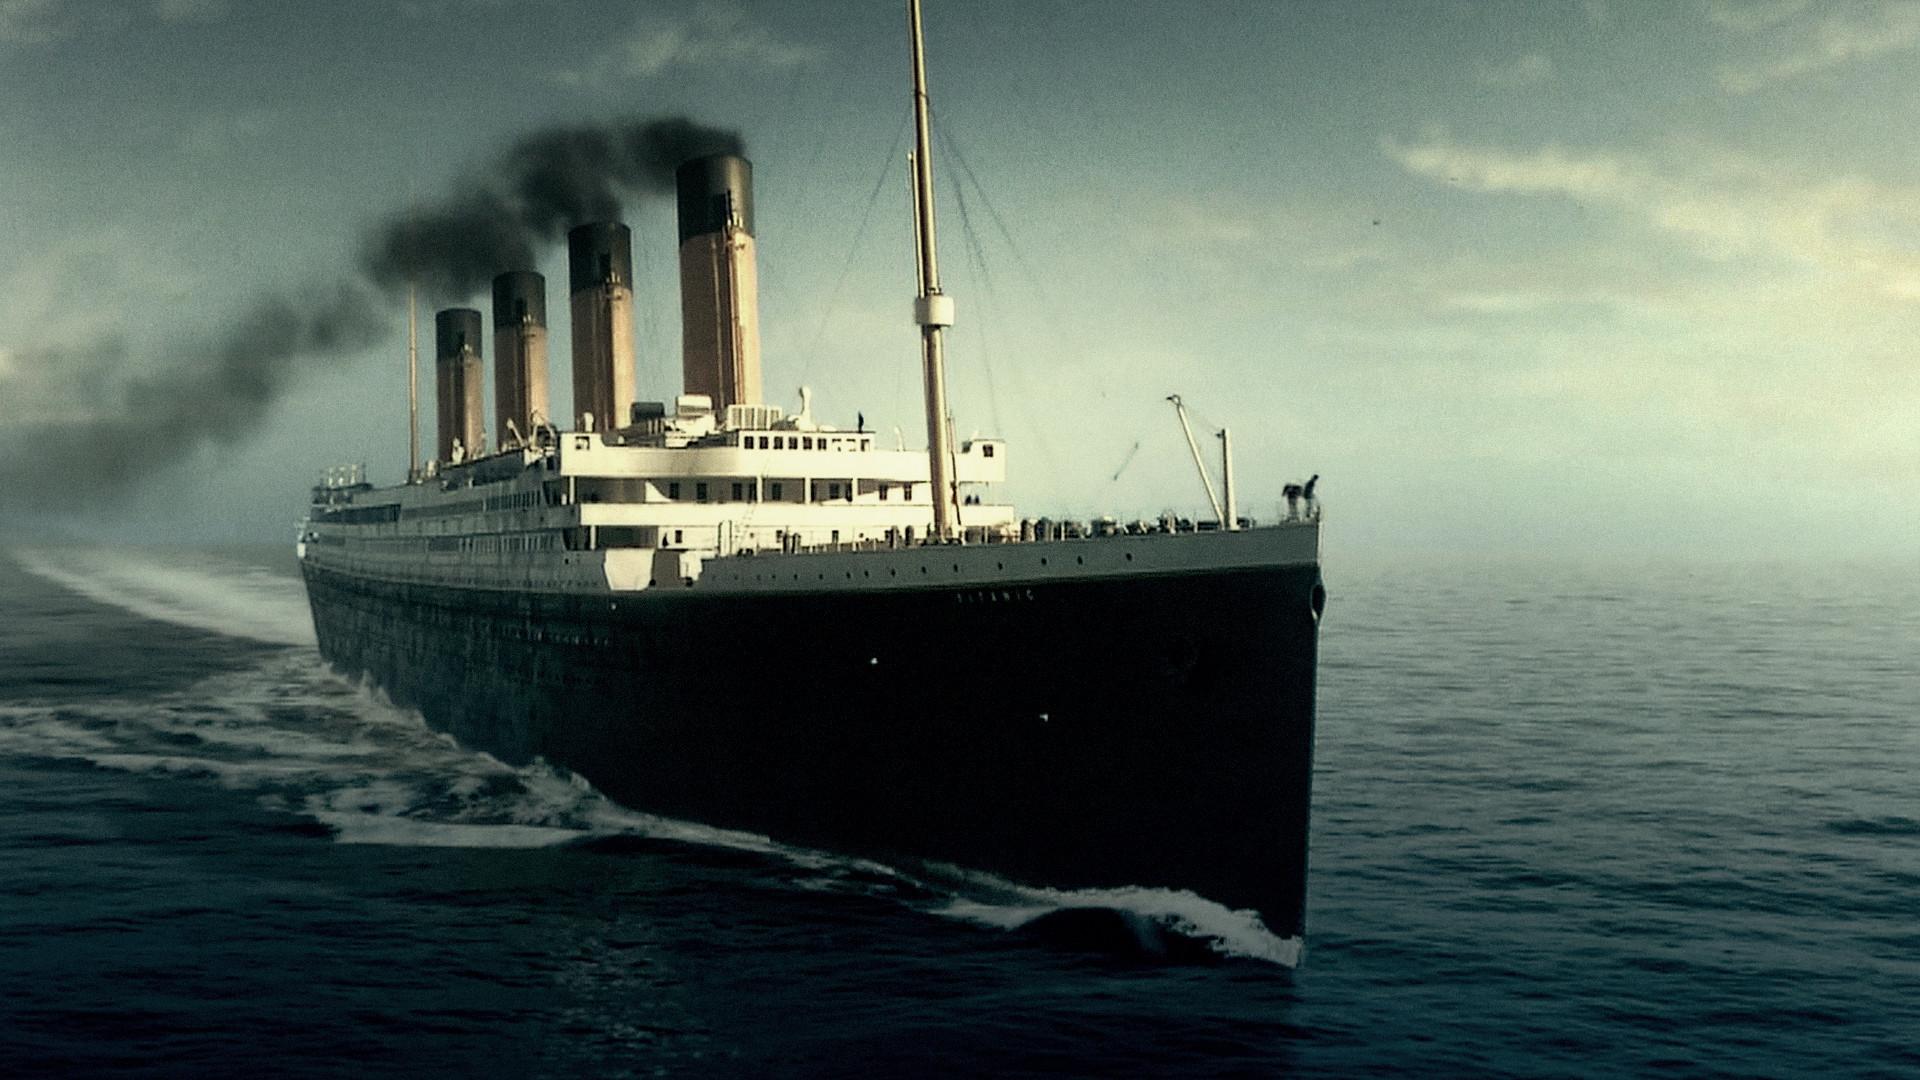 Of The Sinking R M S Titanic 15th April